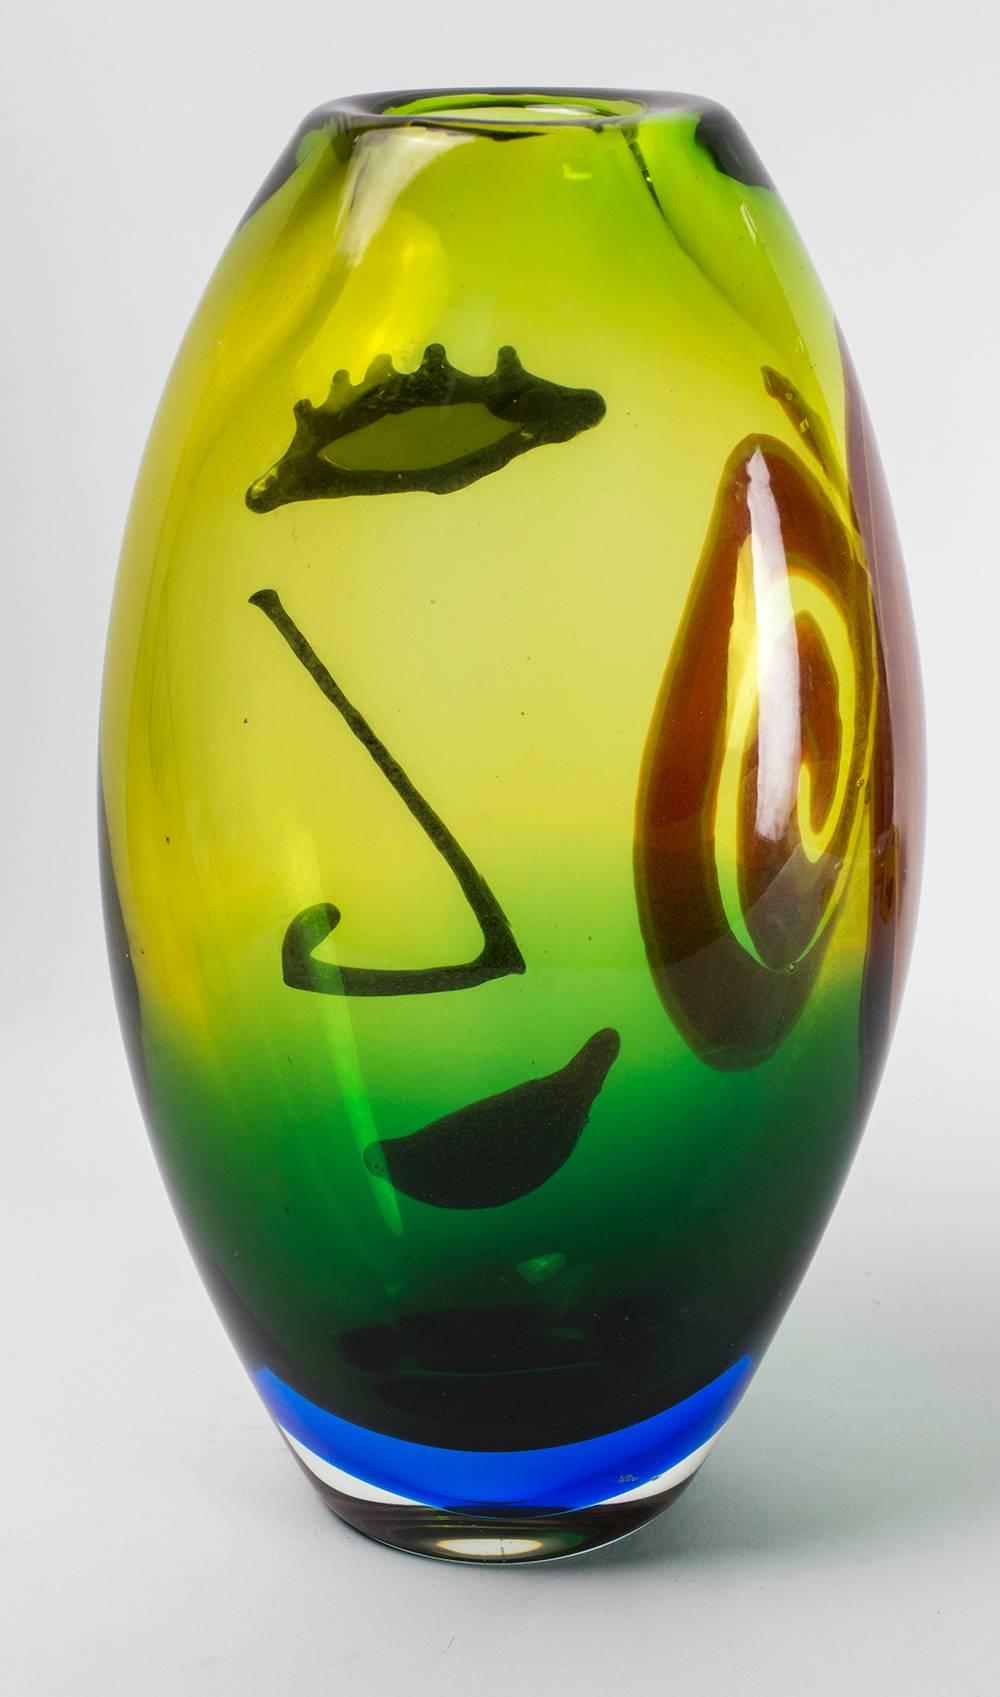 For the lovers of Murano, an alluring abstract Picasso style face design Art Glass Vase. Colorless glass with multi colors and outer murrain facial features; Size: 12 inches high x 7 inches wide x 4 inches. Approx. weight: 4560 grams; A World Class